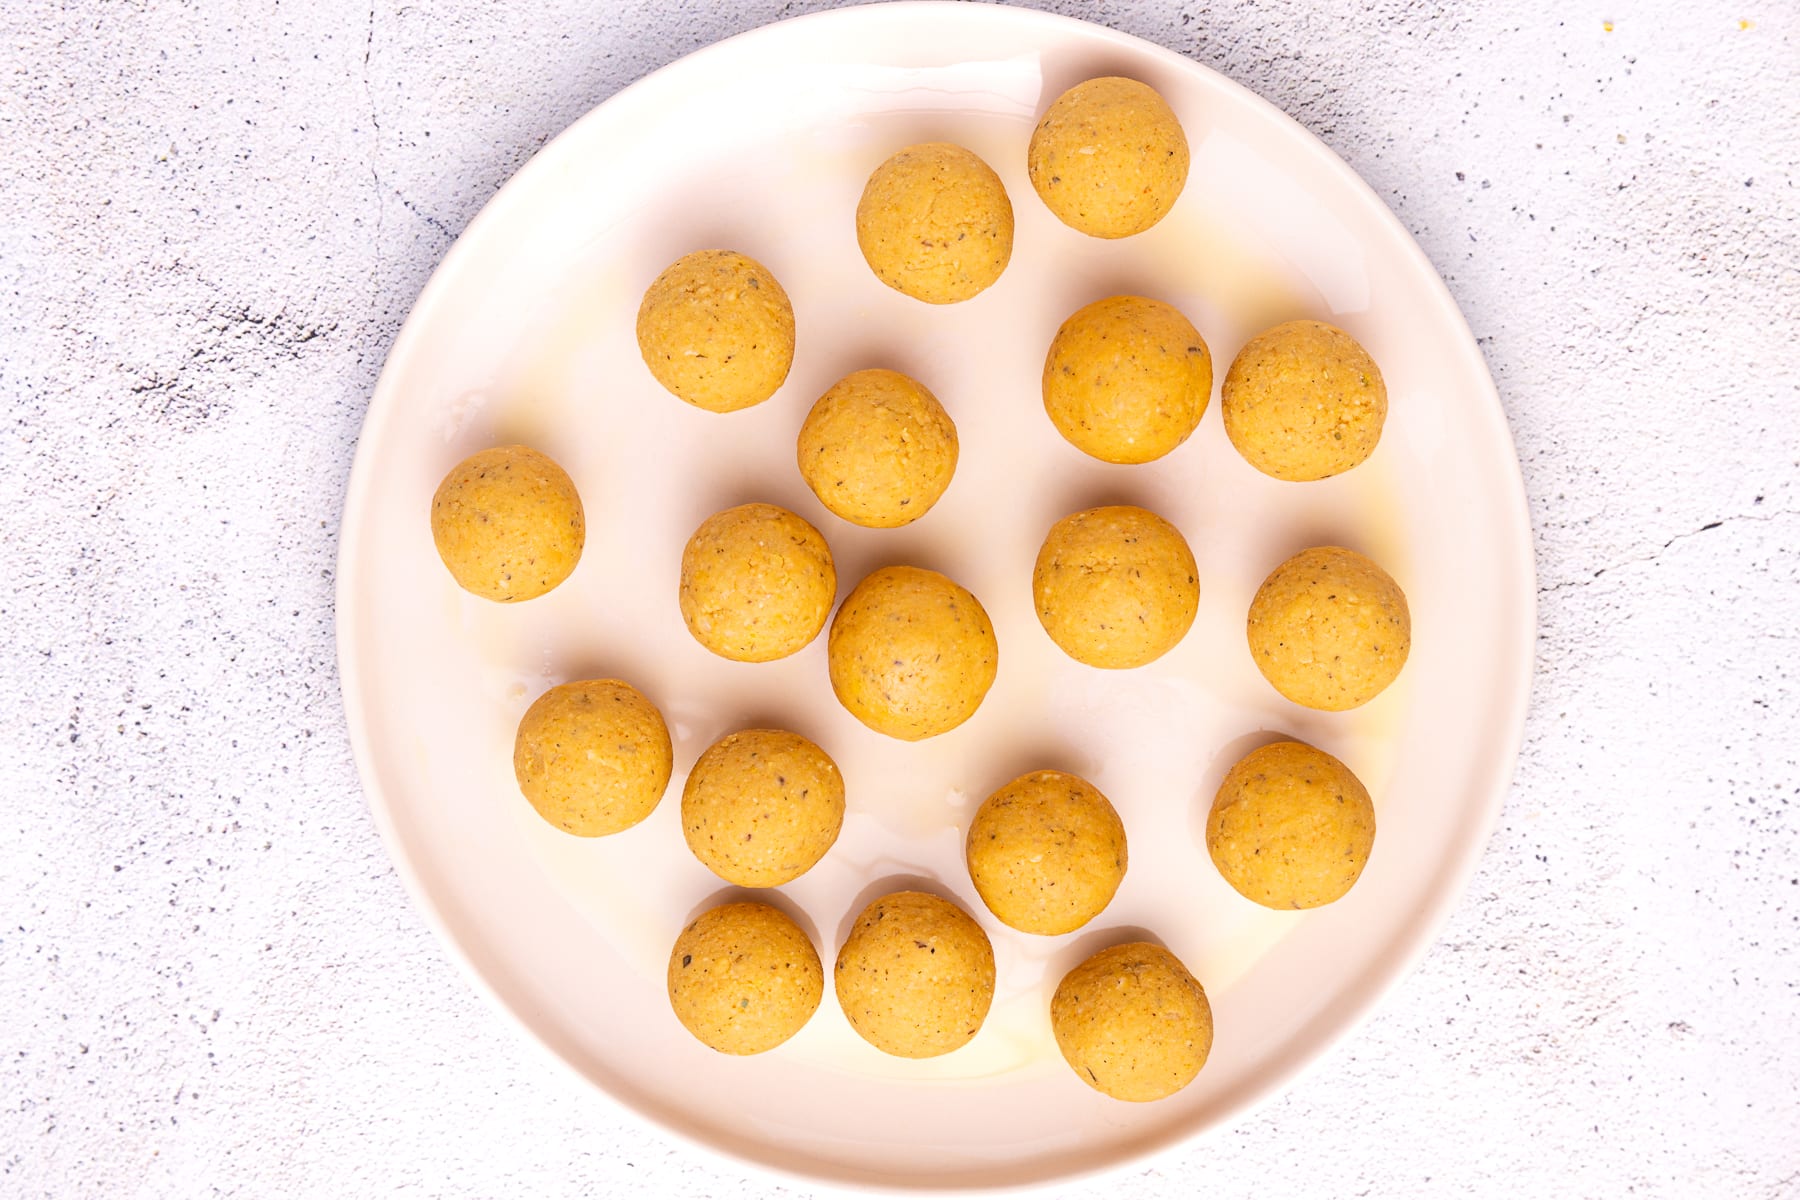 uncooked chickpea meatballs on a plate